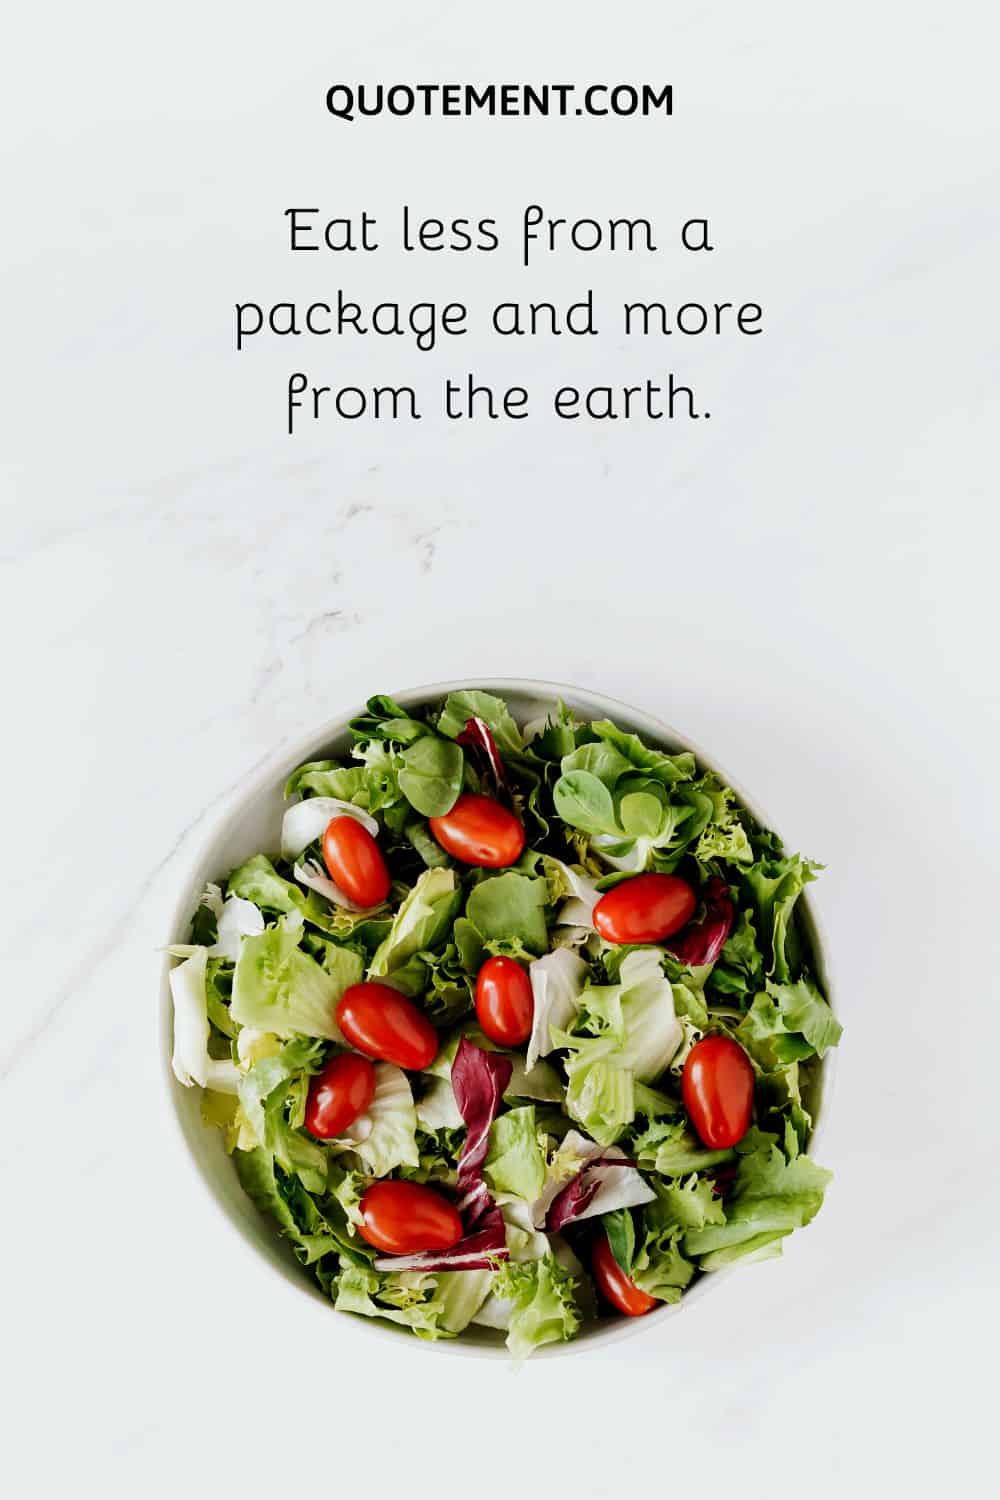 Eat less from a package and more from the earth